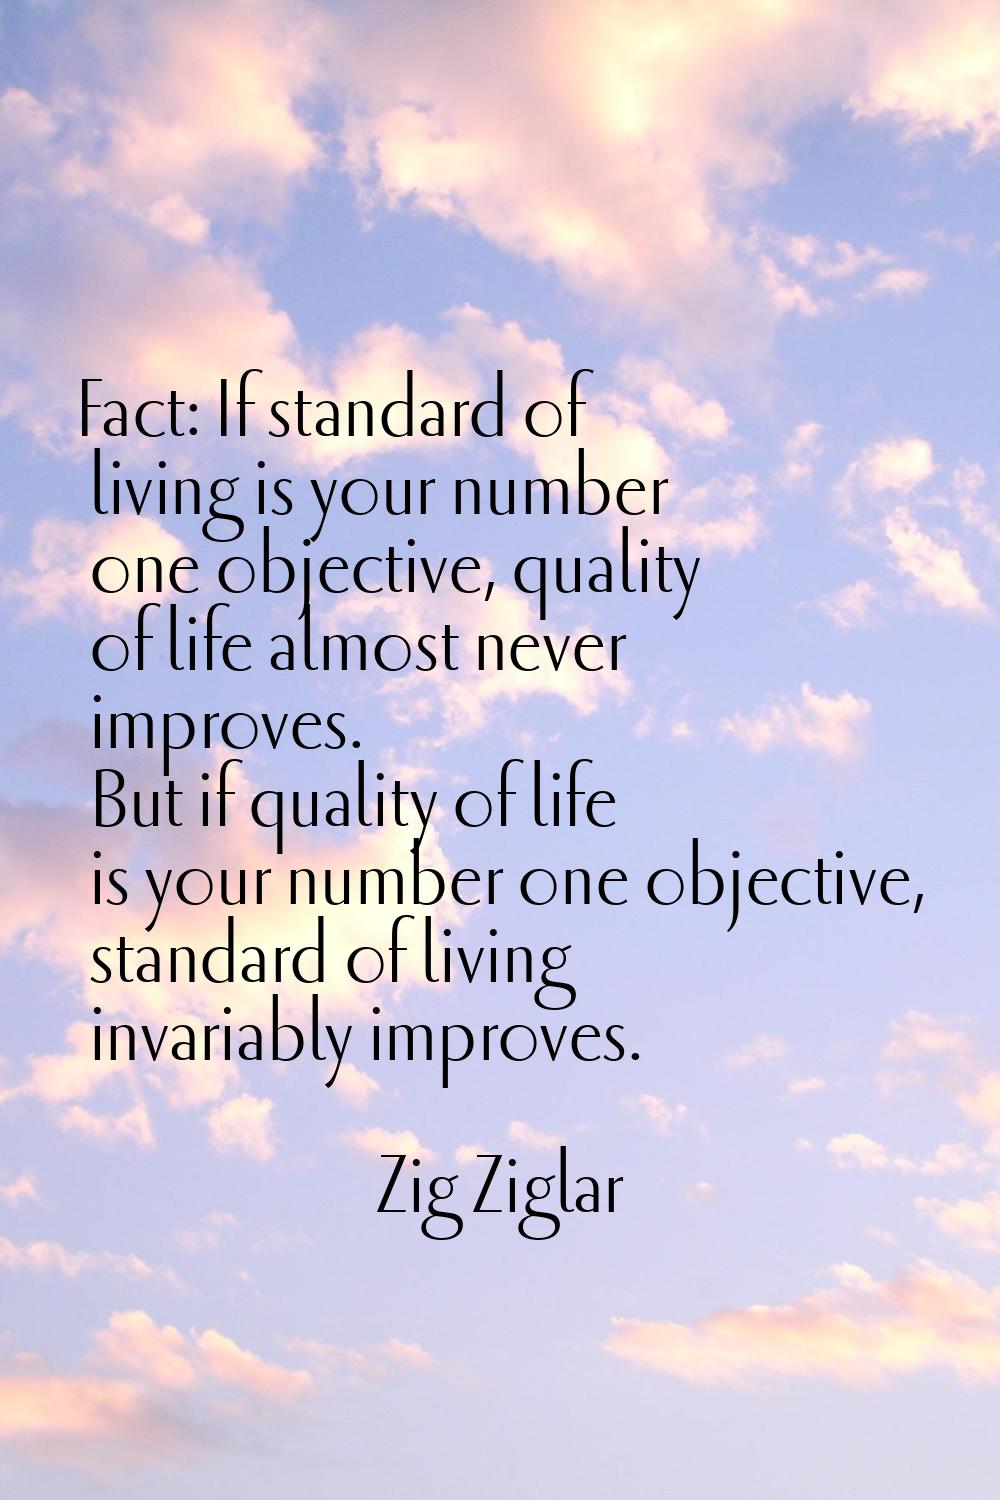 Fact: If standard of living is your number one objective, quality of life almost never improves. Bu